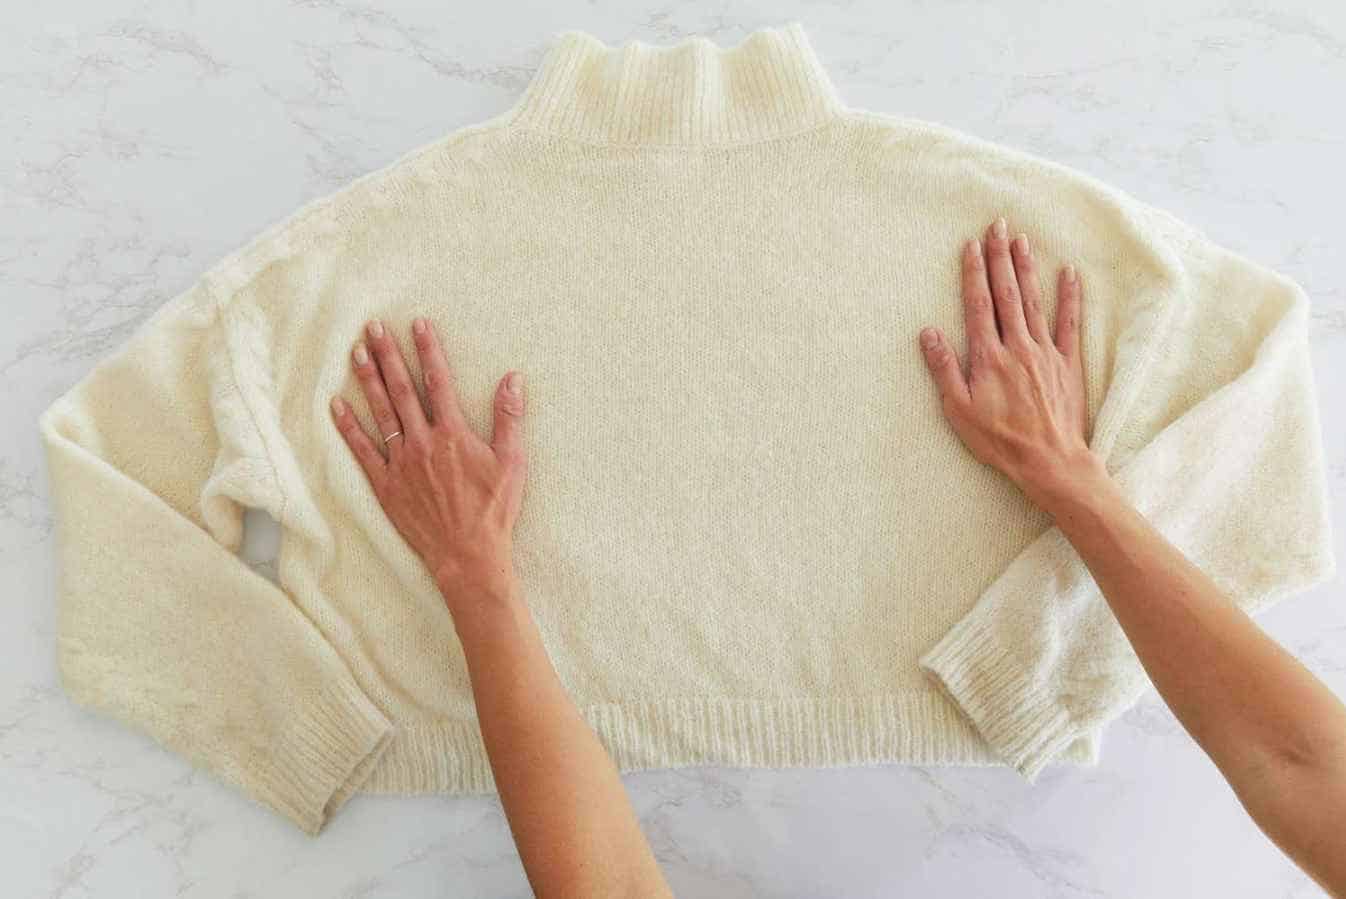 3 Methods to Stretch a Sweater